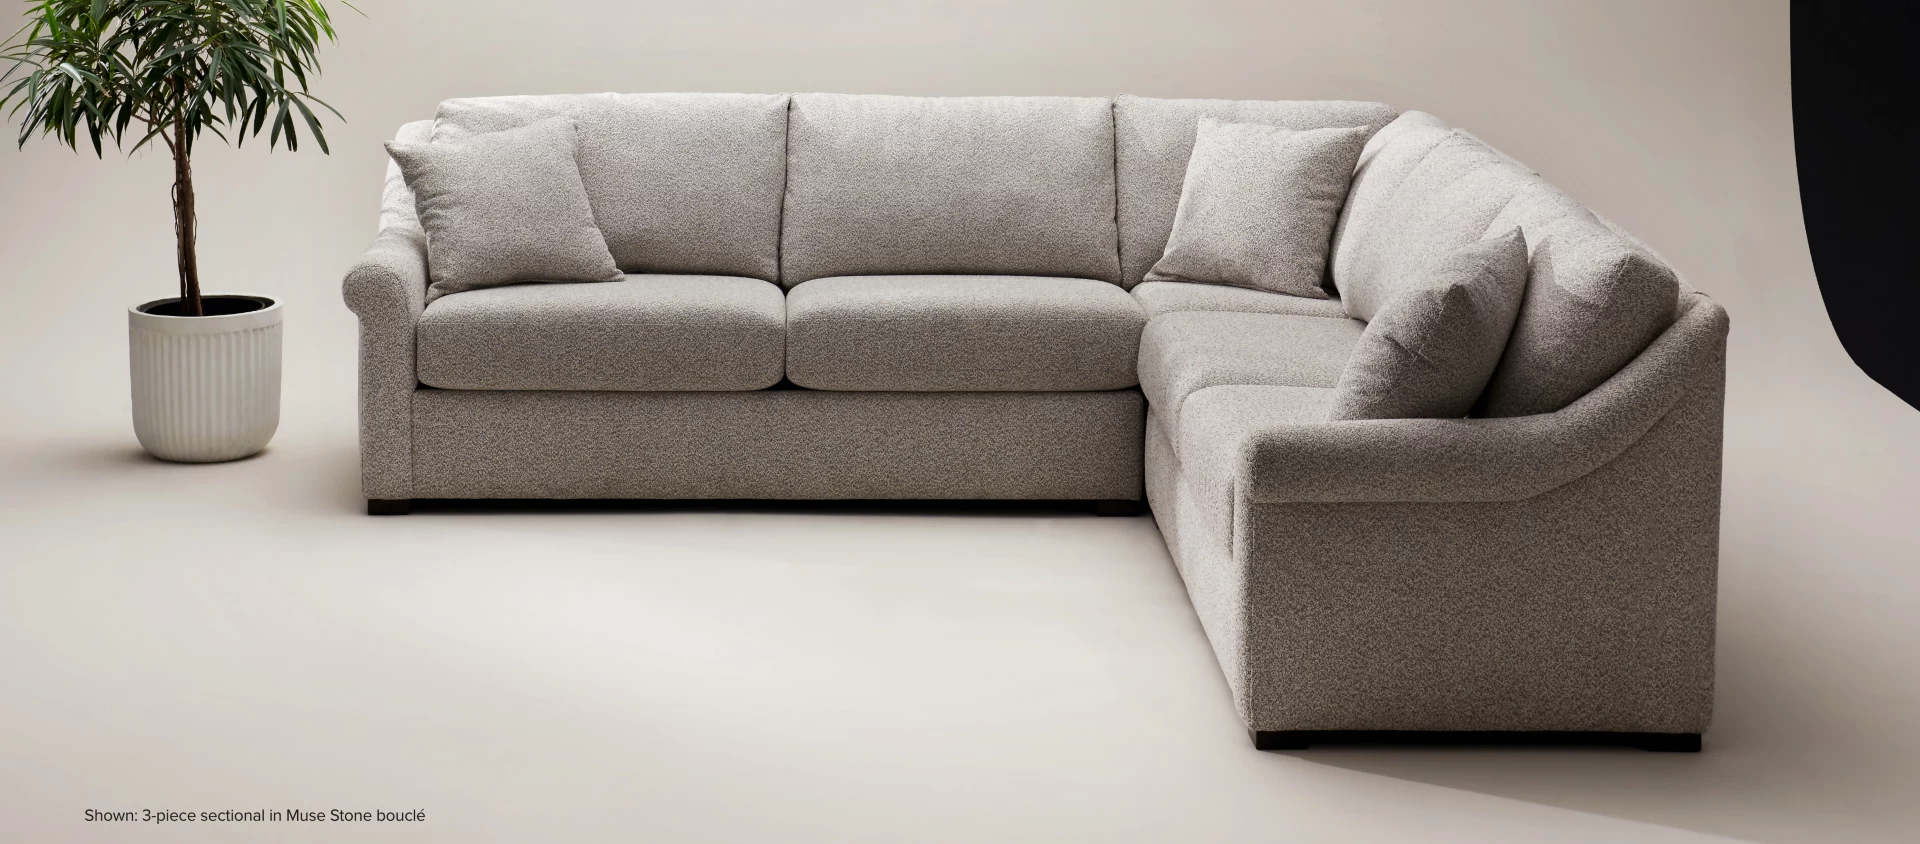 Bowery 3-piece sectional in muse stone boucle